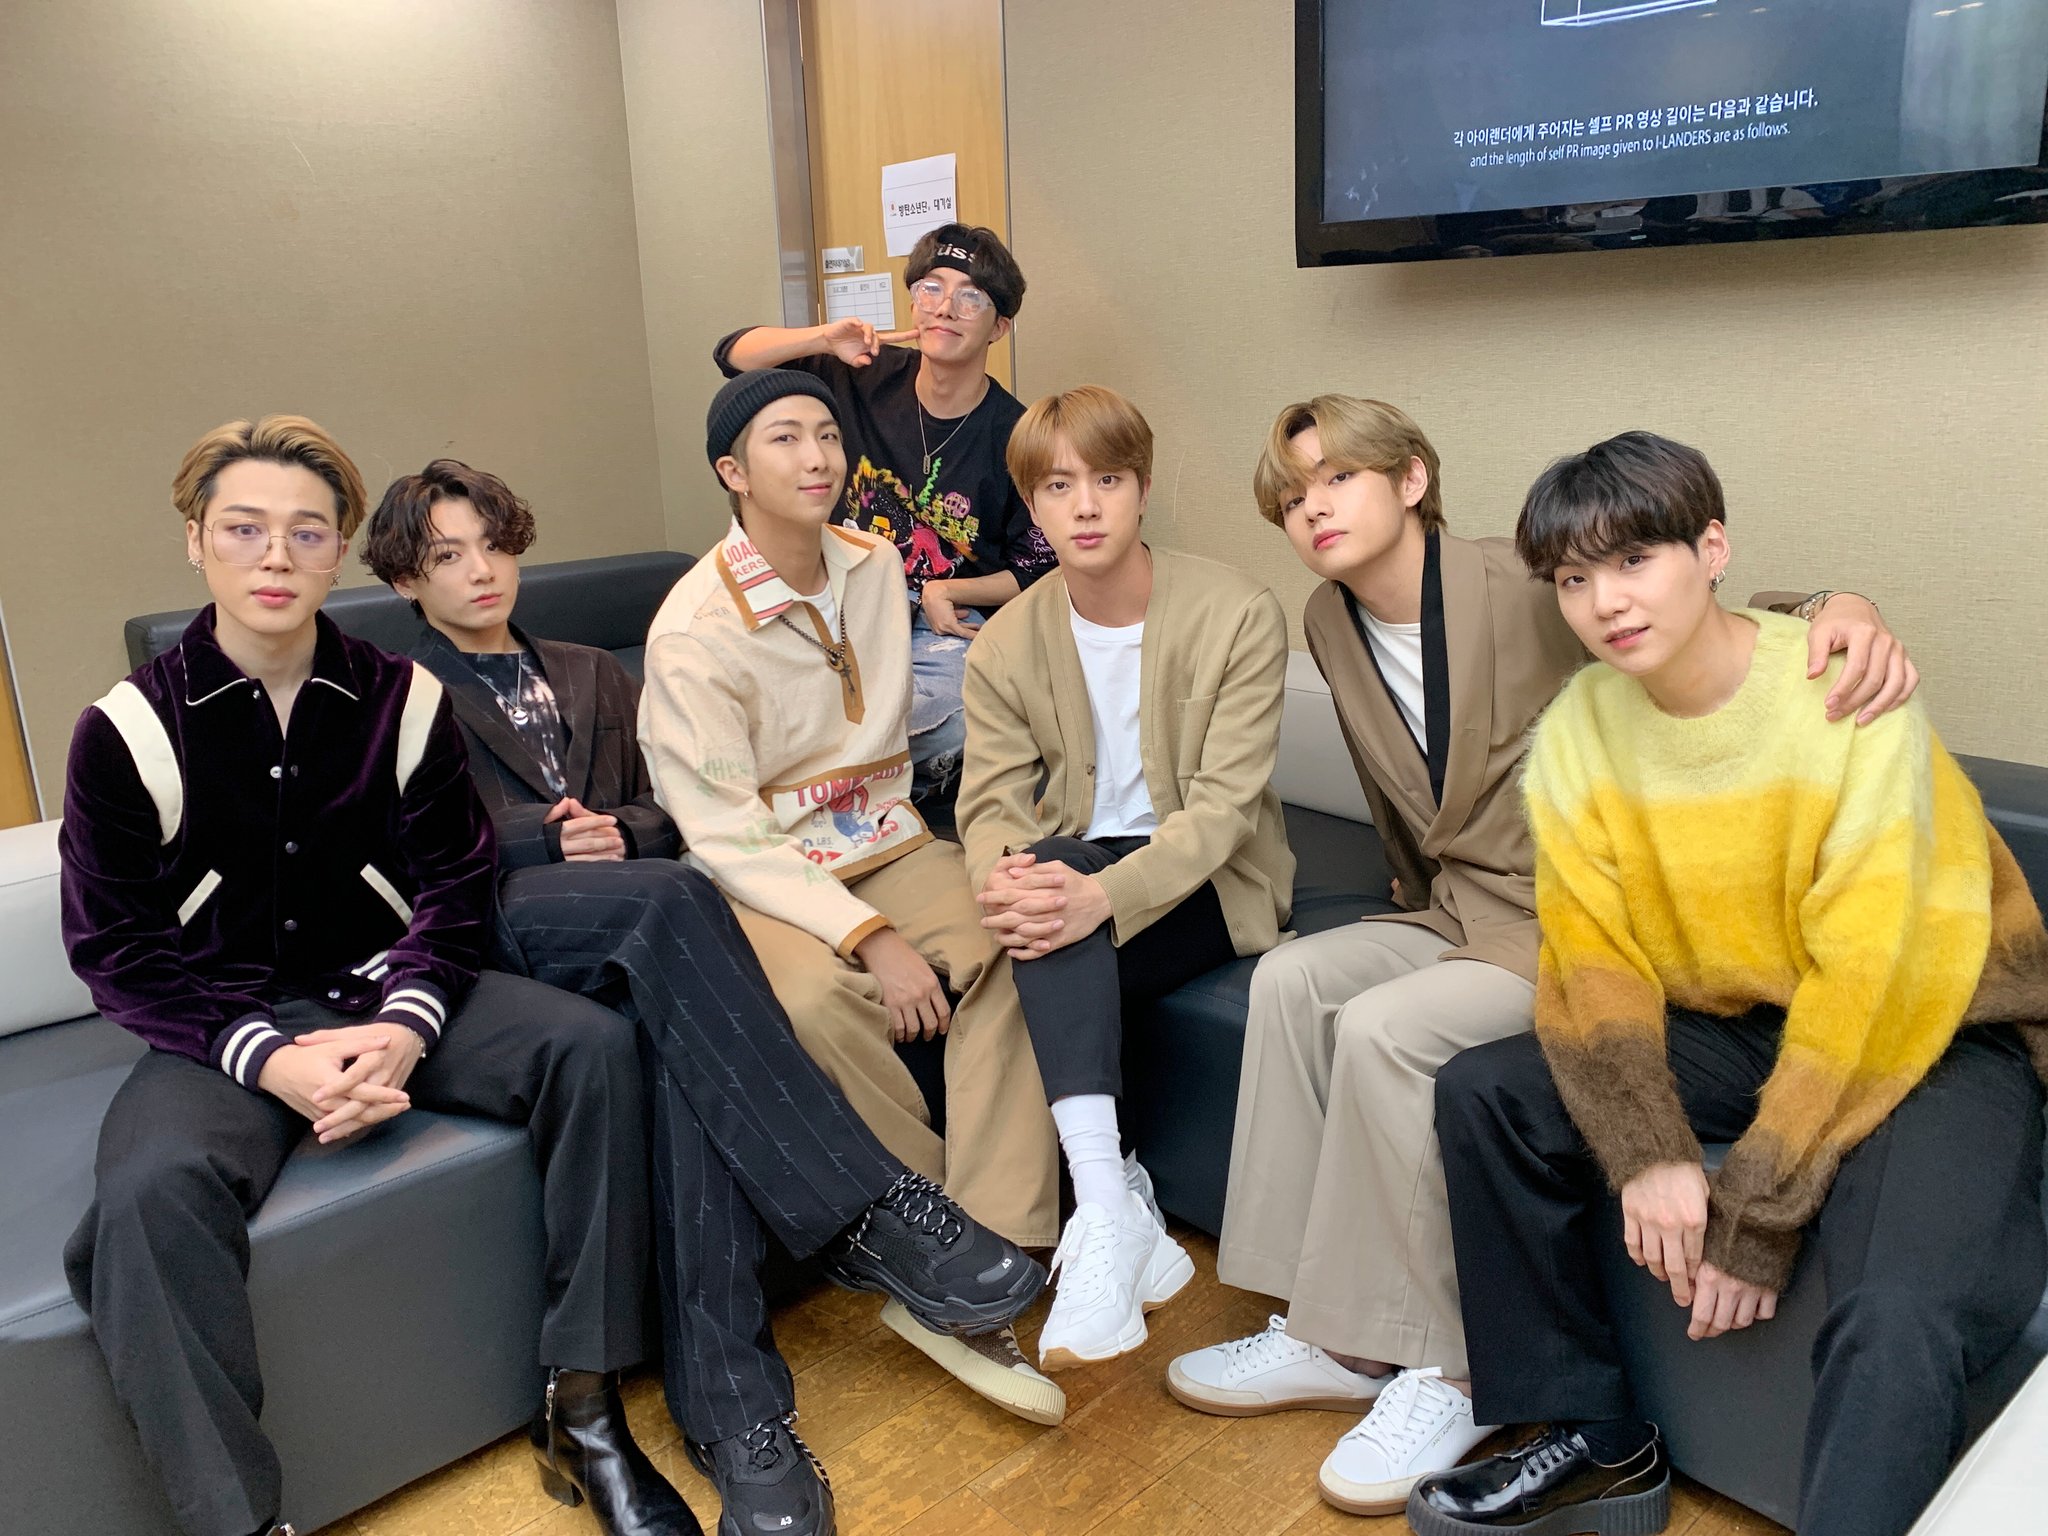 bts-to-give-message-of-hope-at-75th-united-nations-general-assembly-on-september-23-3